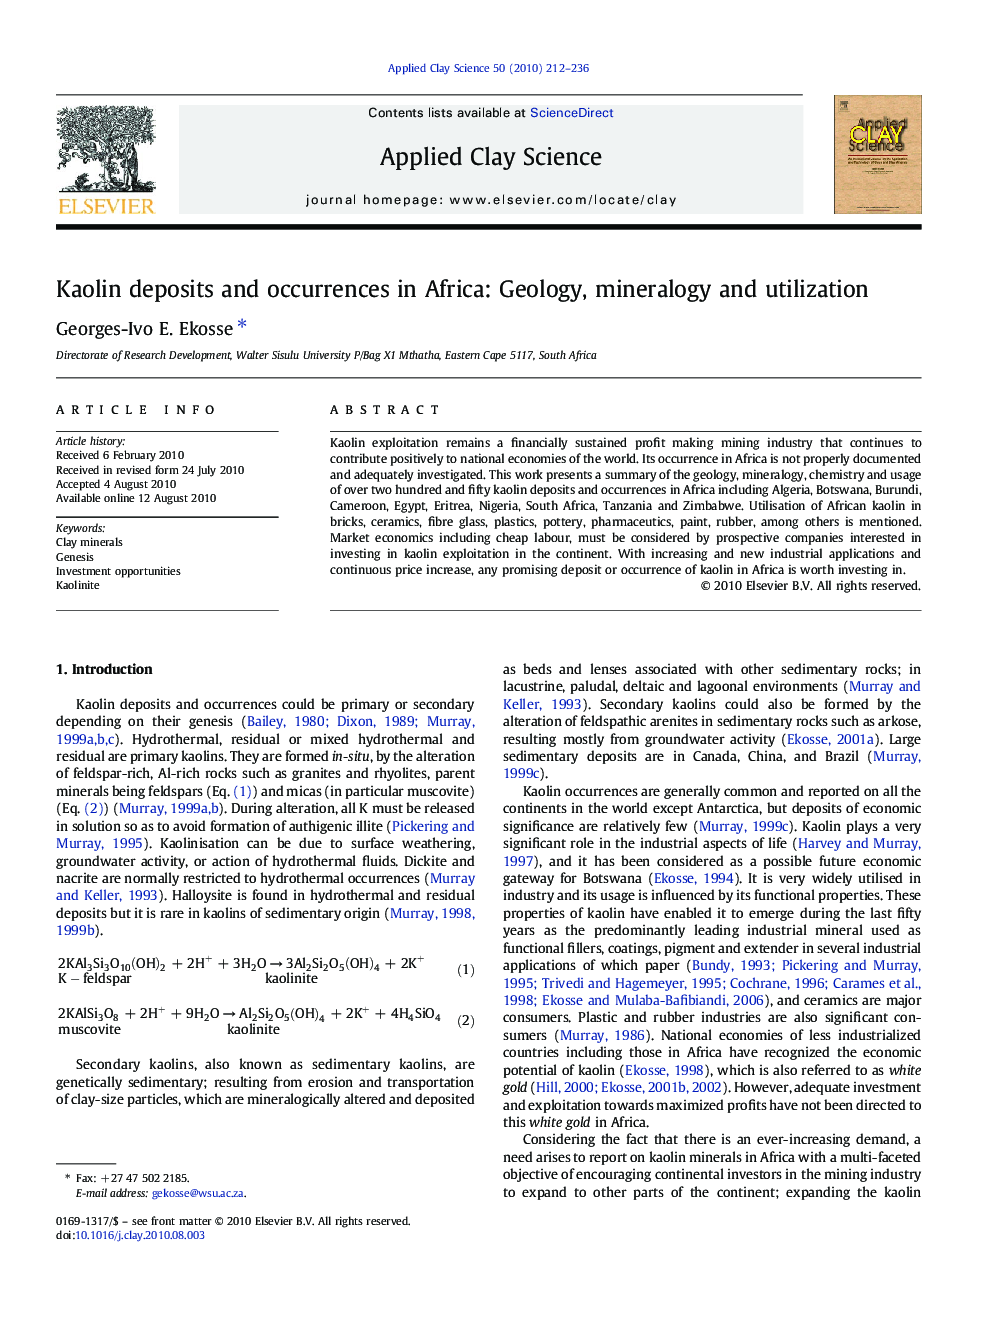 Kaolin deposits and occurrences in Africa: Geology, mineralogy and utilization